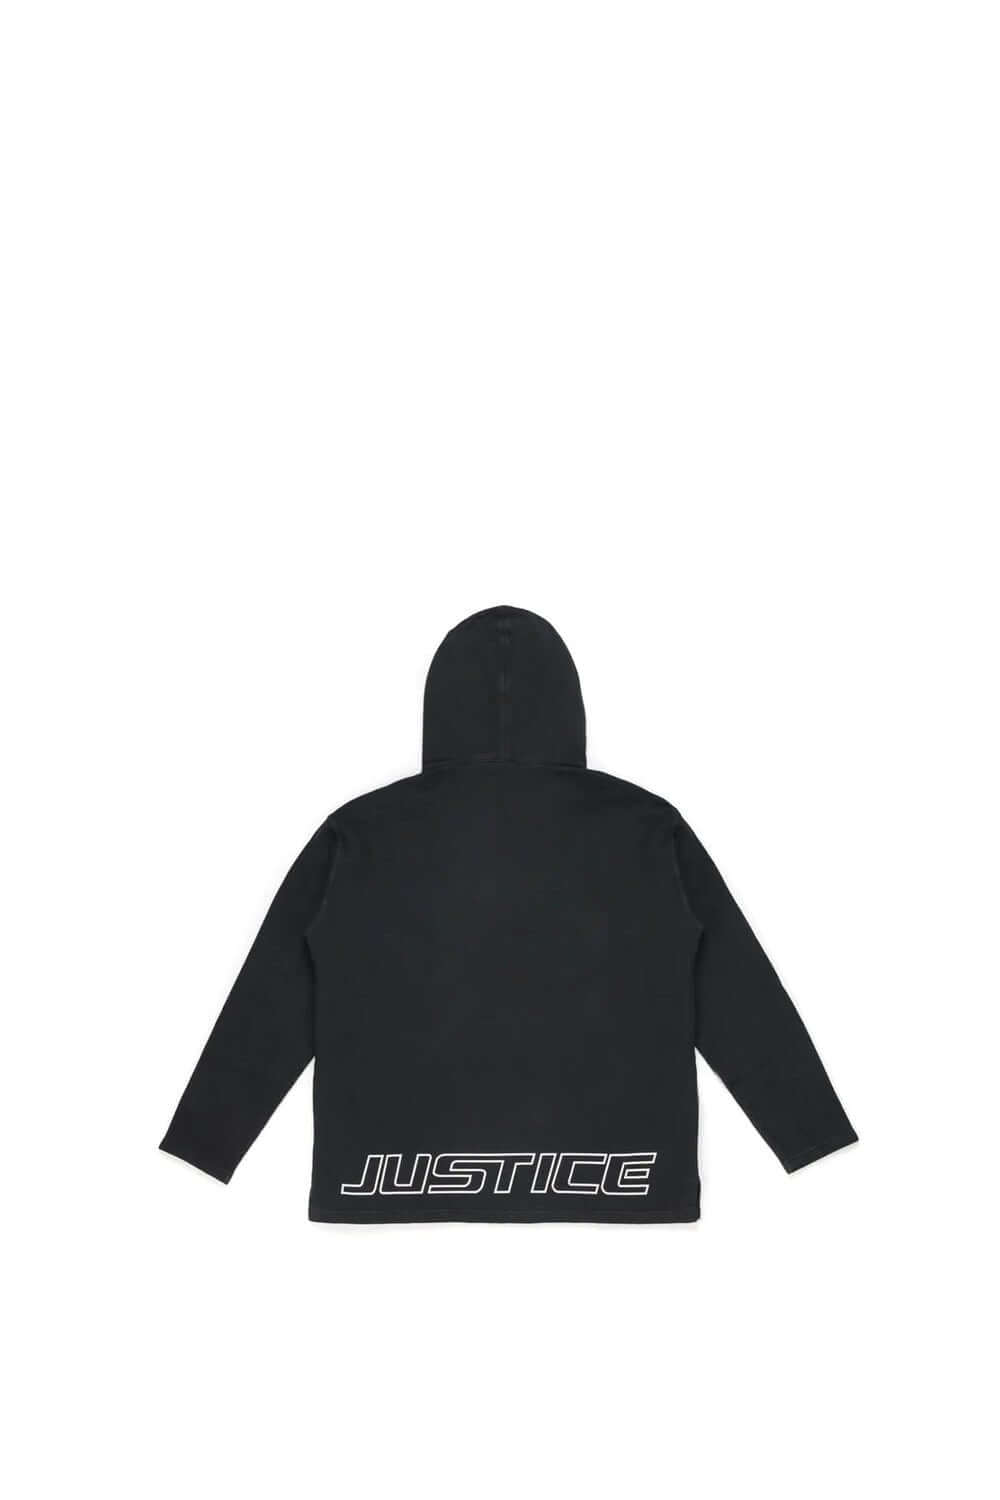 Justice Sweater Hoodie with frontal fanny pack pocket. 'JUSTICE' print on the back. 100% cotton. Made in Italy. HTC LOS ANGELES